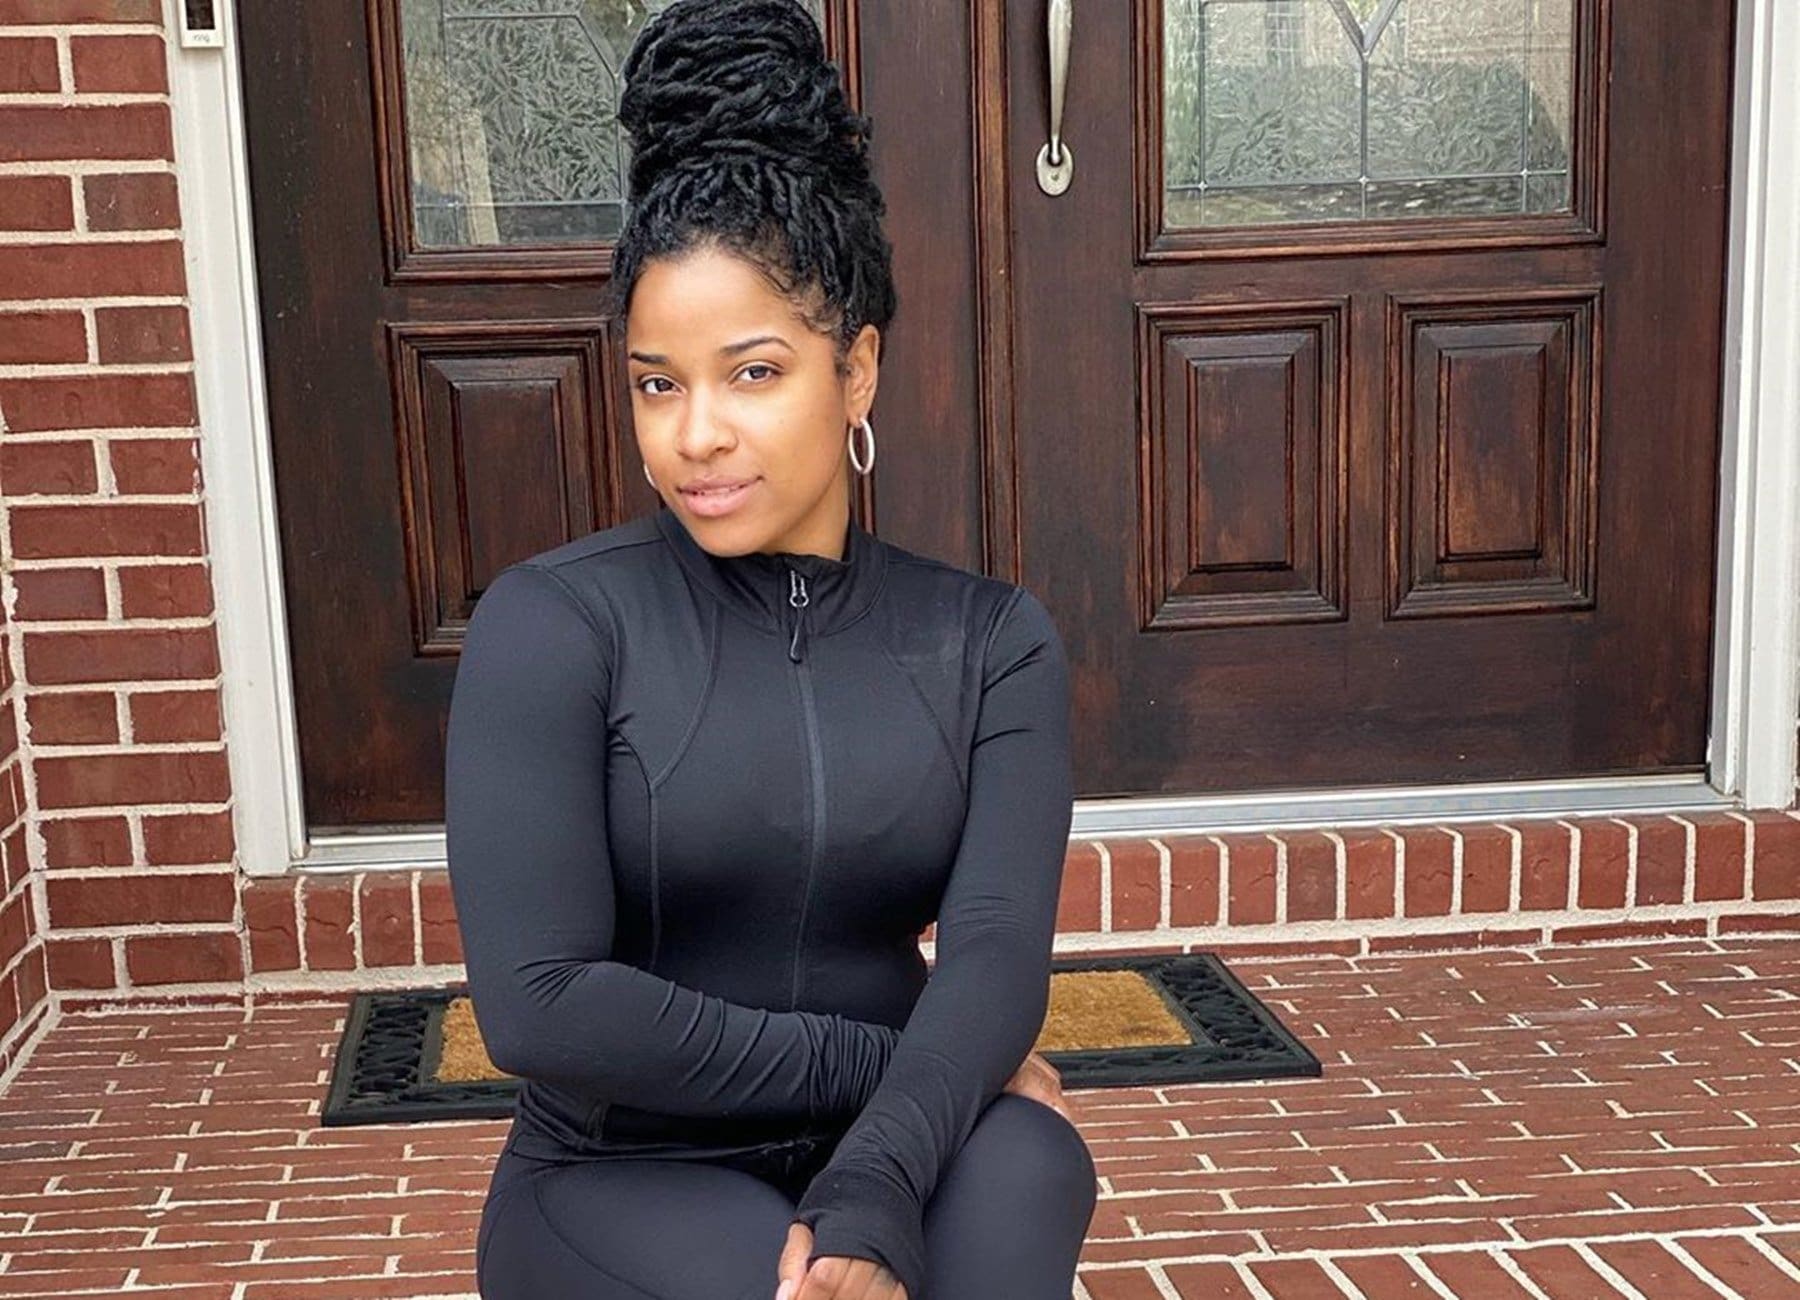 Toya Johnson Looks Gorgeous In This Amazing Outfit - See Her Video